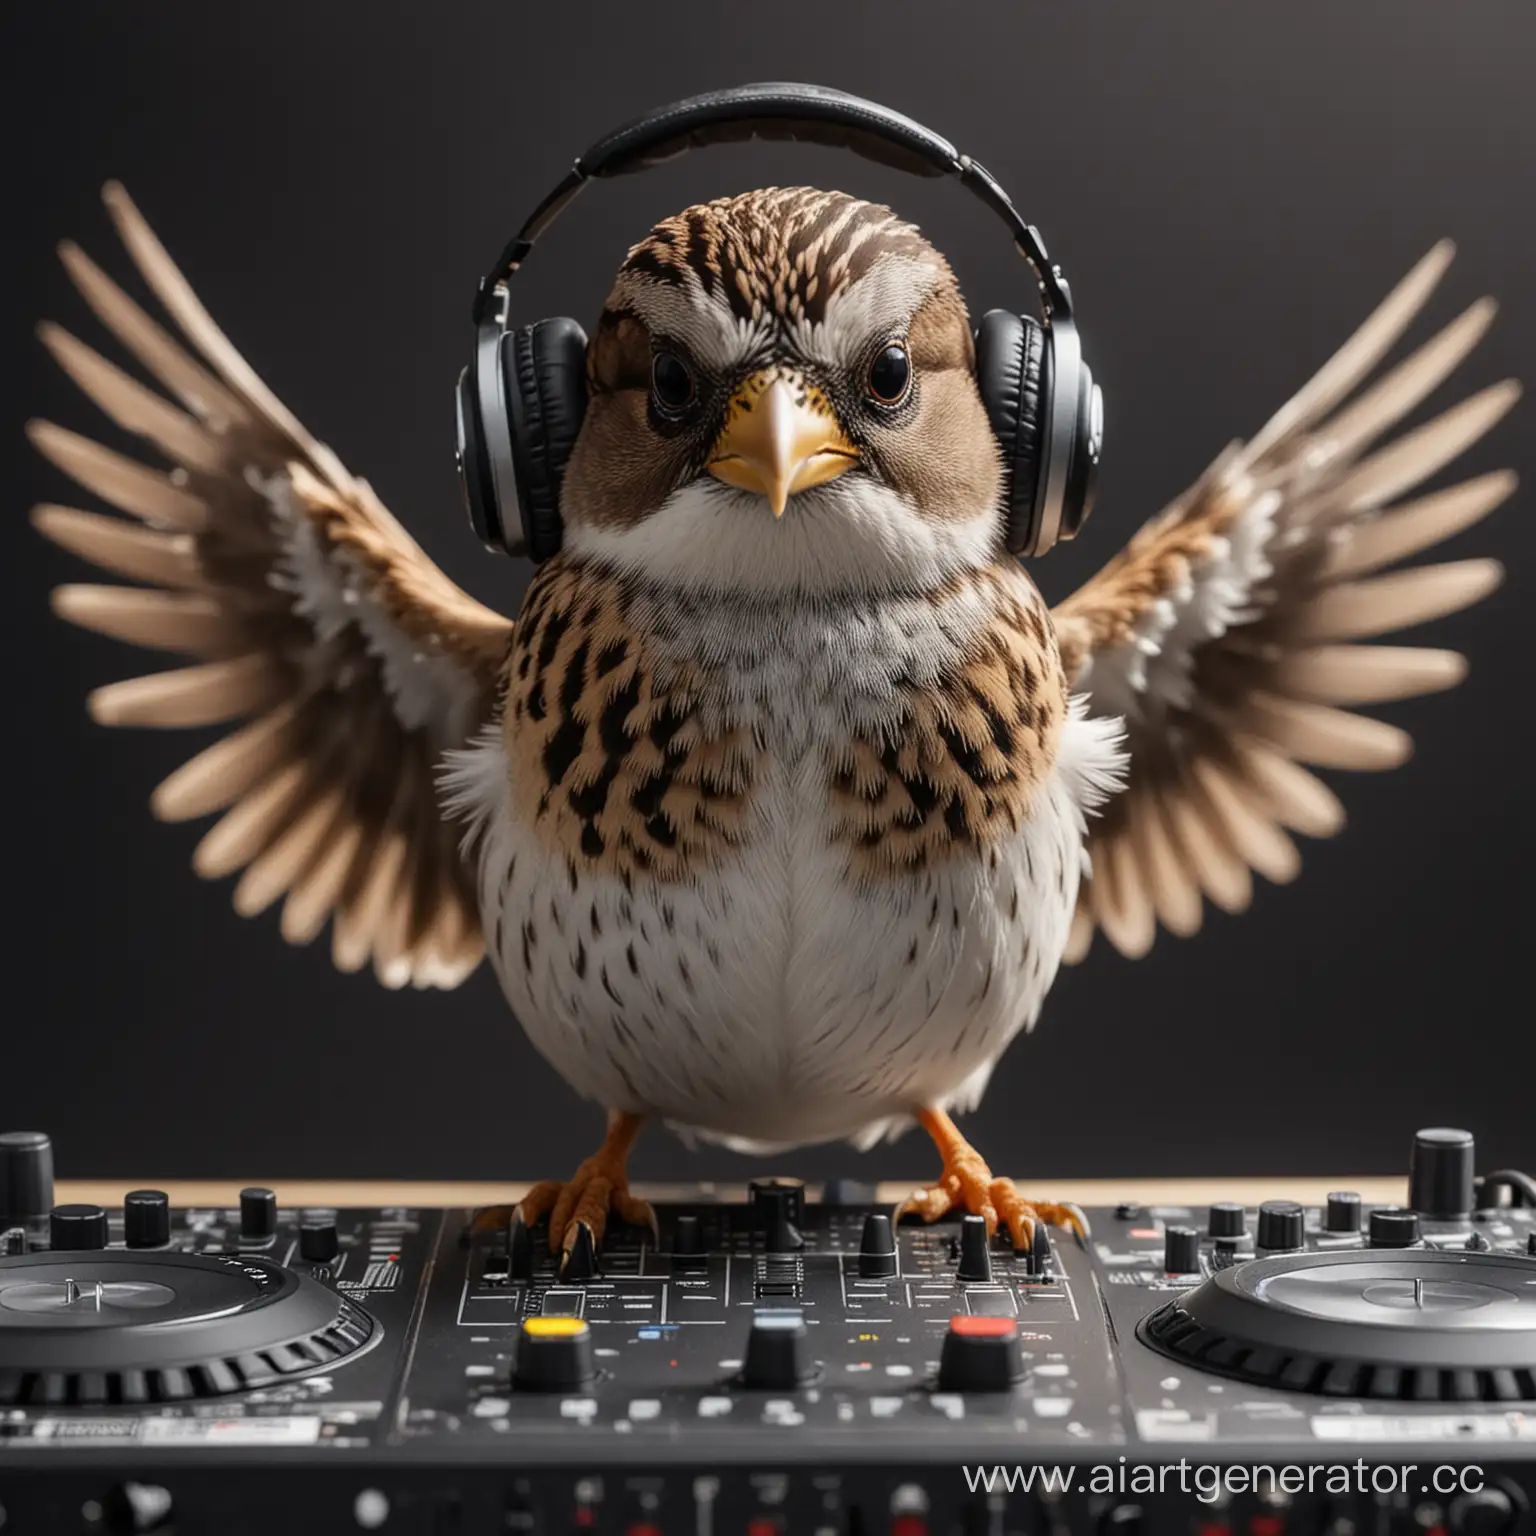 Cool-Sparrow-DJ-Mixing-Beats-with-Glasses-and-Headphones